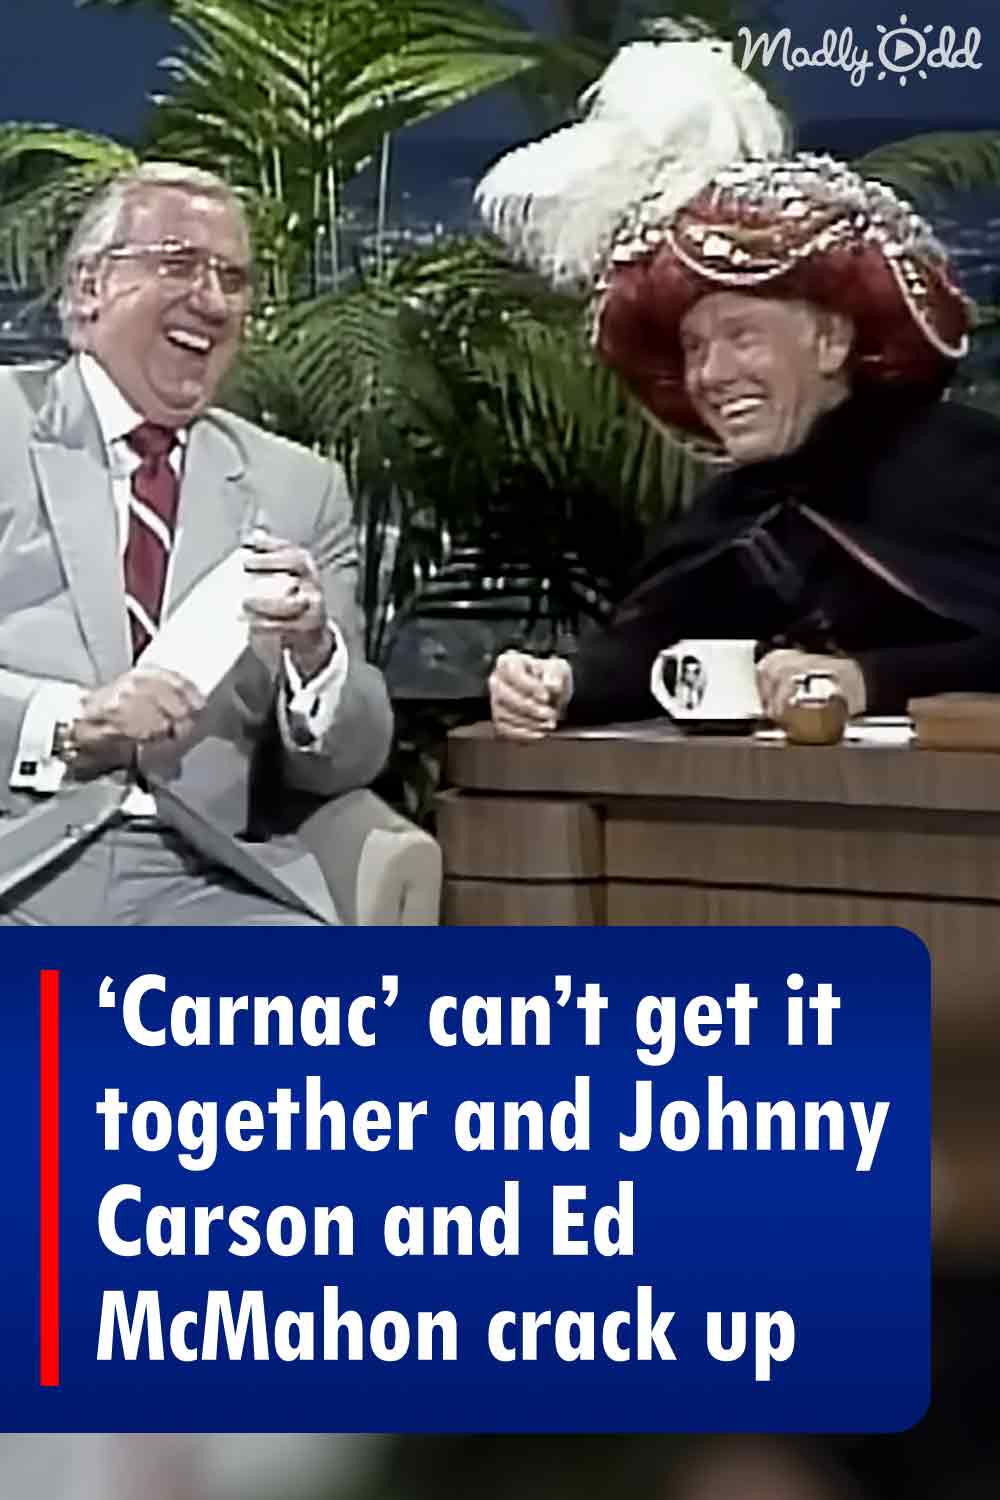 ‘Carnac’ can’t get it together and Johnny Carson and Ed McMahon crack up